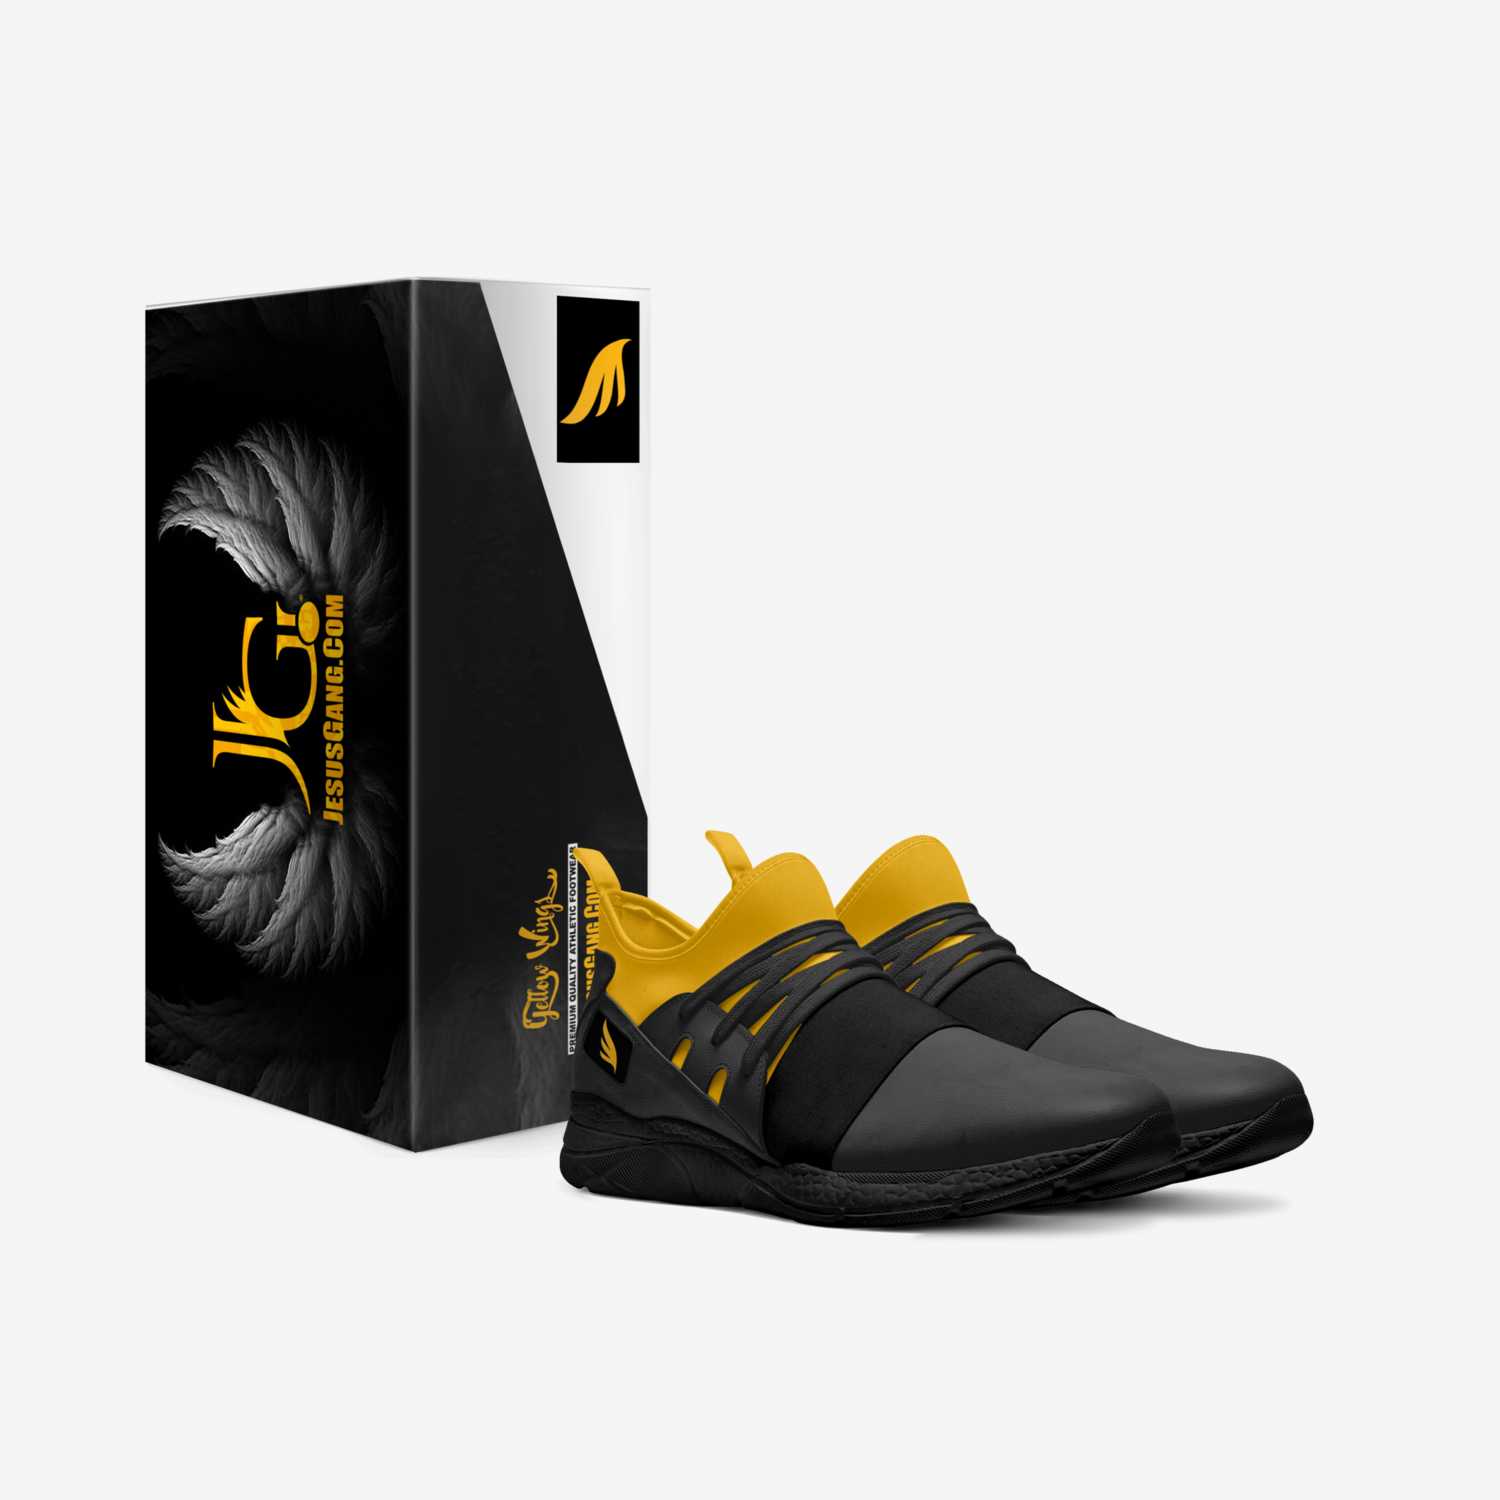 YELLOW WINGS custom made in Italy shoes by Antwan Lewis | Box view